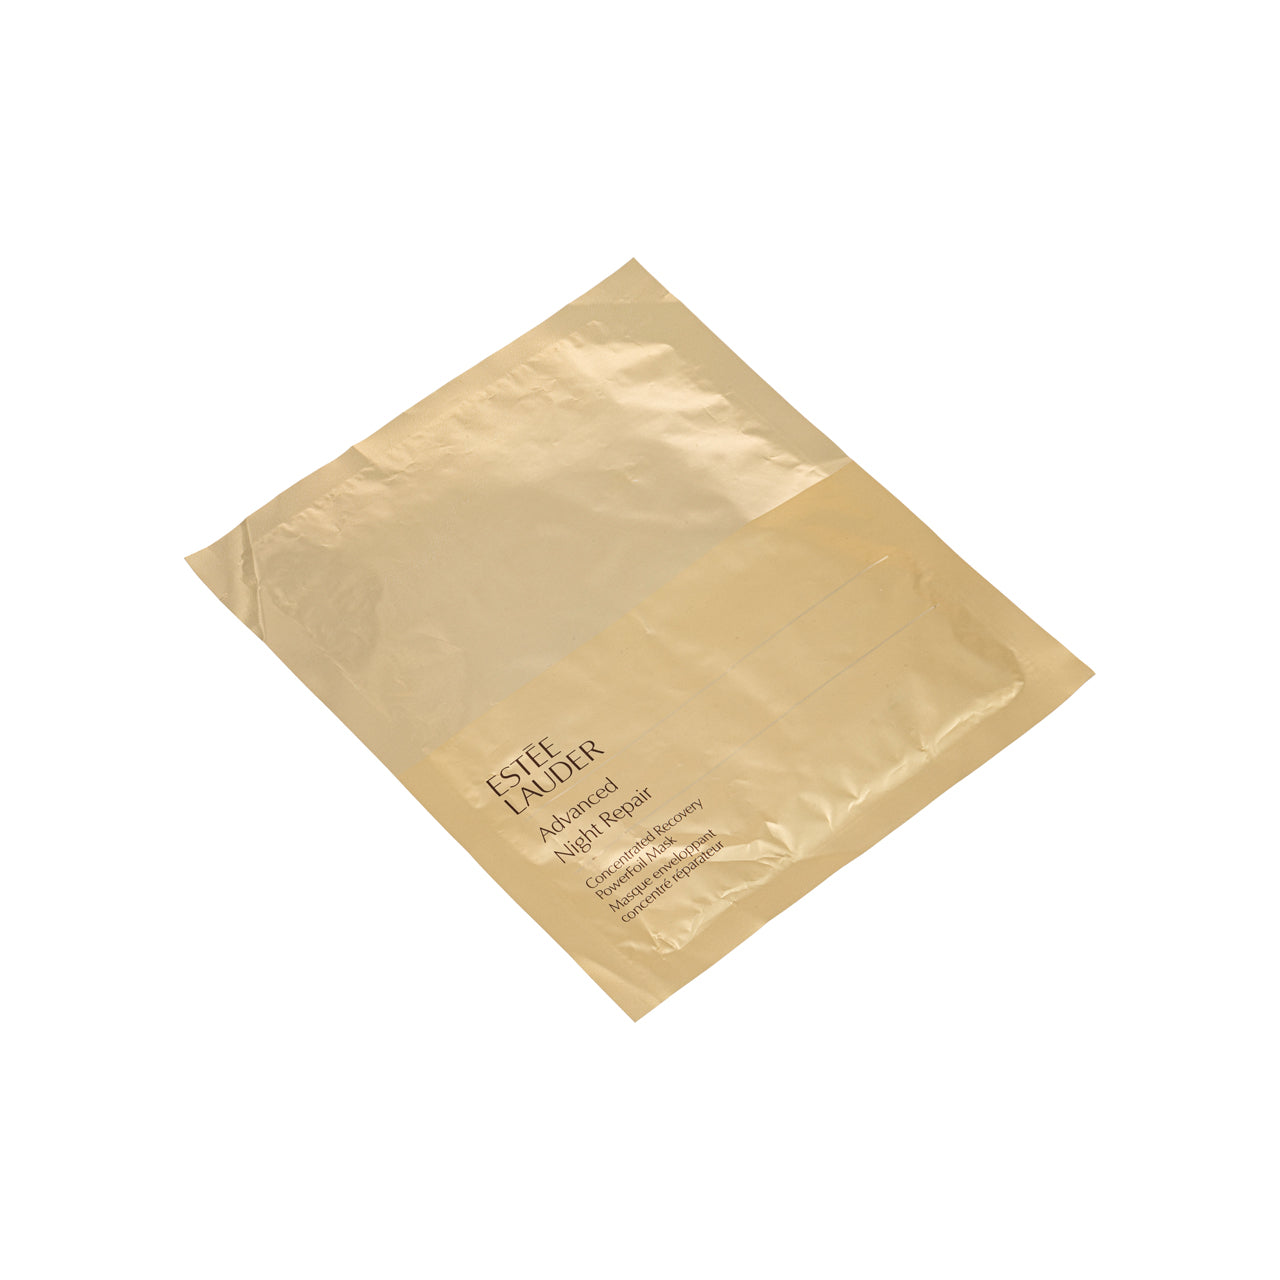 Estee Lauder Advanced Night Repair Concentrated Recovery Powerfoil Mask 1PCS